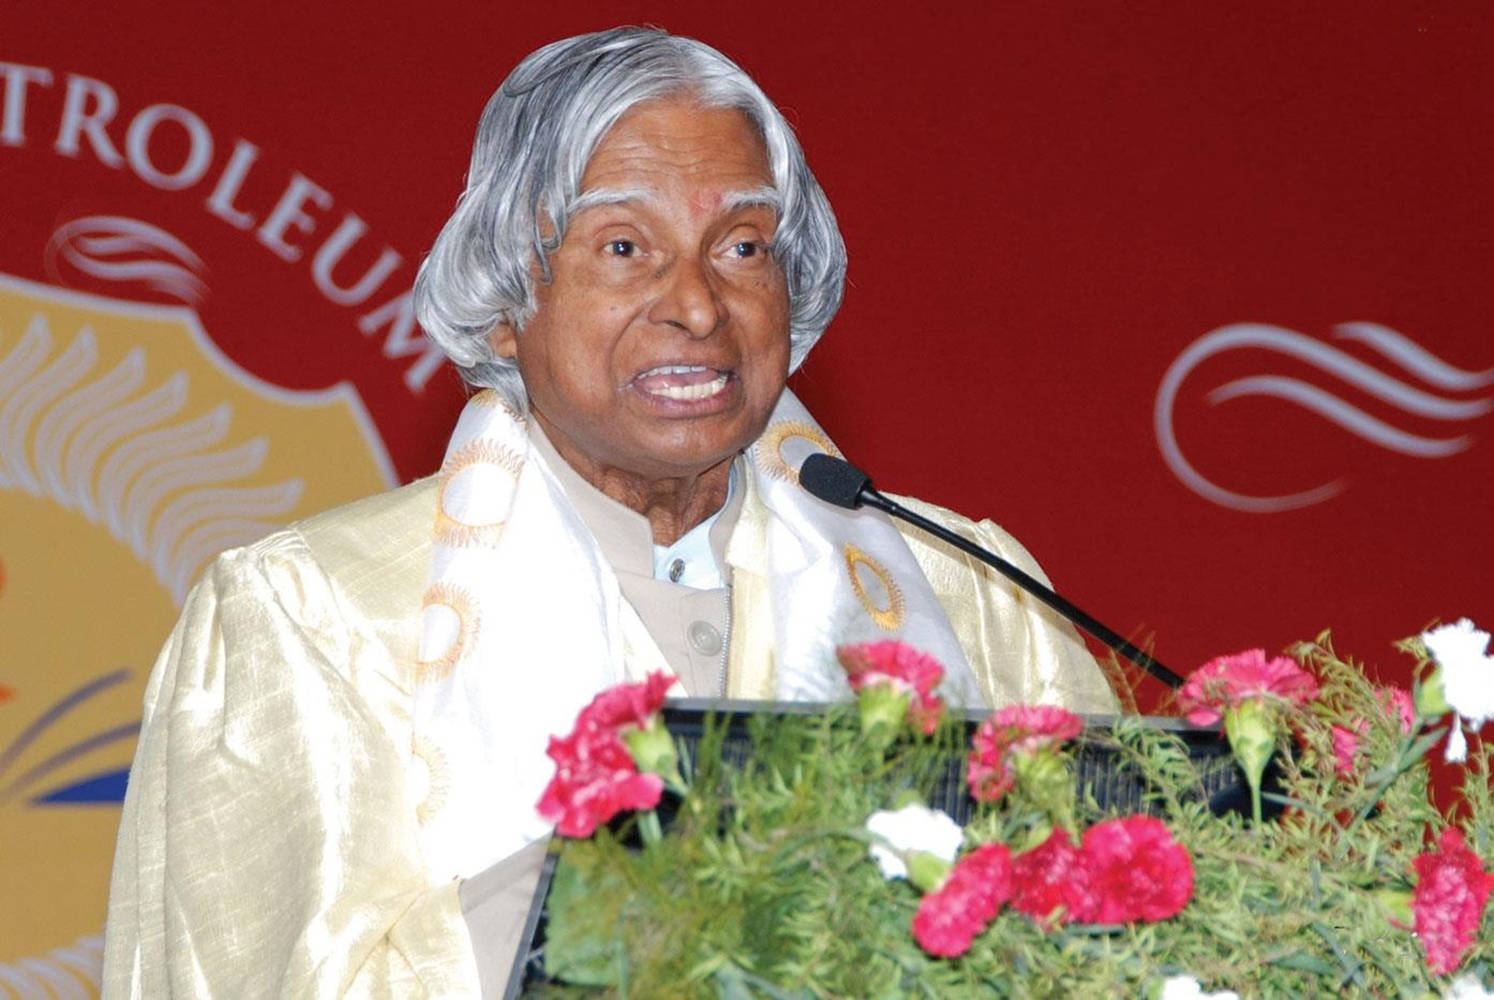 Former Indian President Dr. A.p.j Abdul Kalam Delivering A Powerful Speech. Background